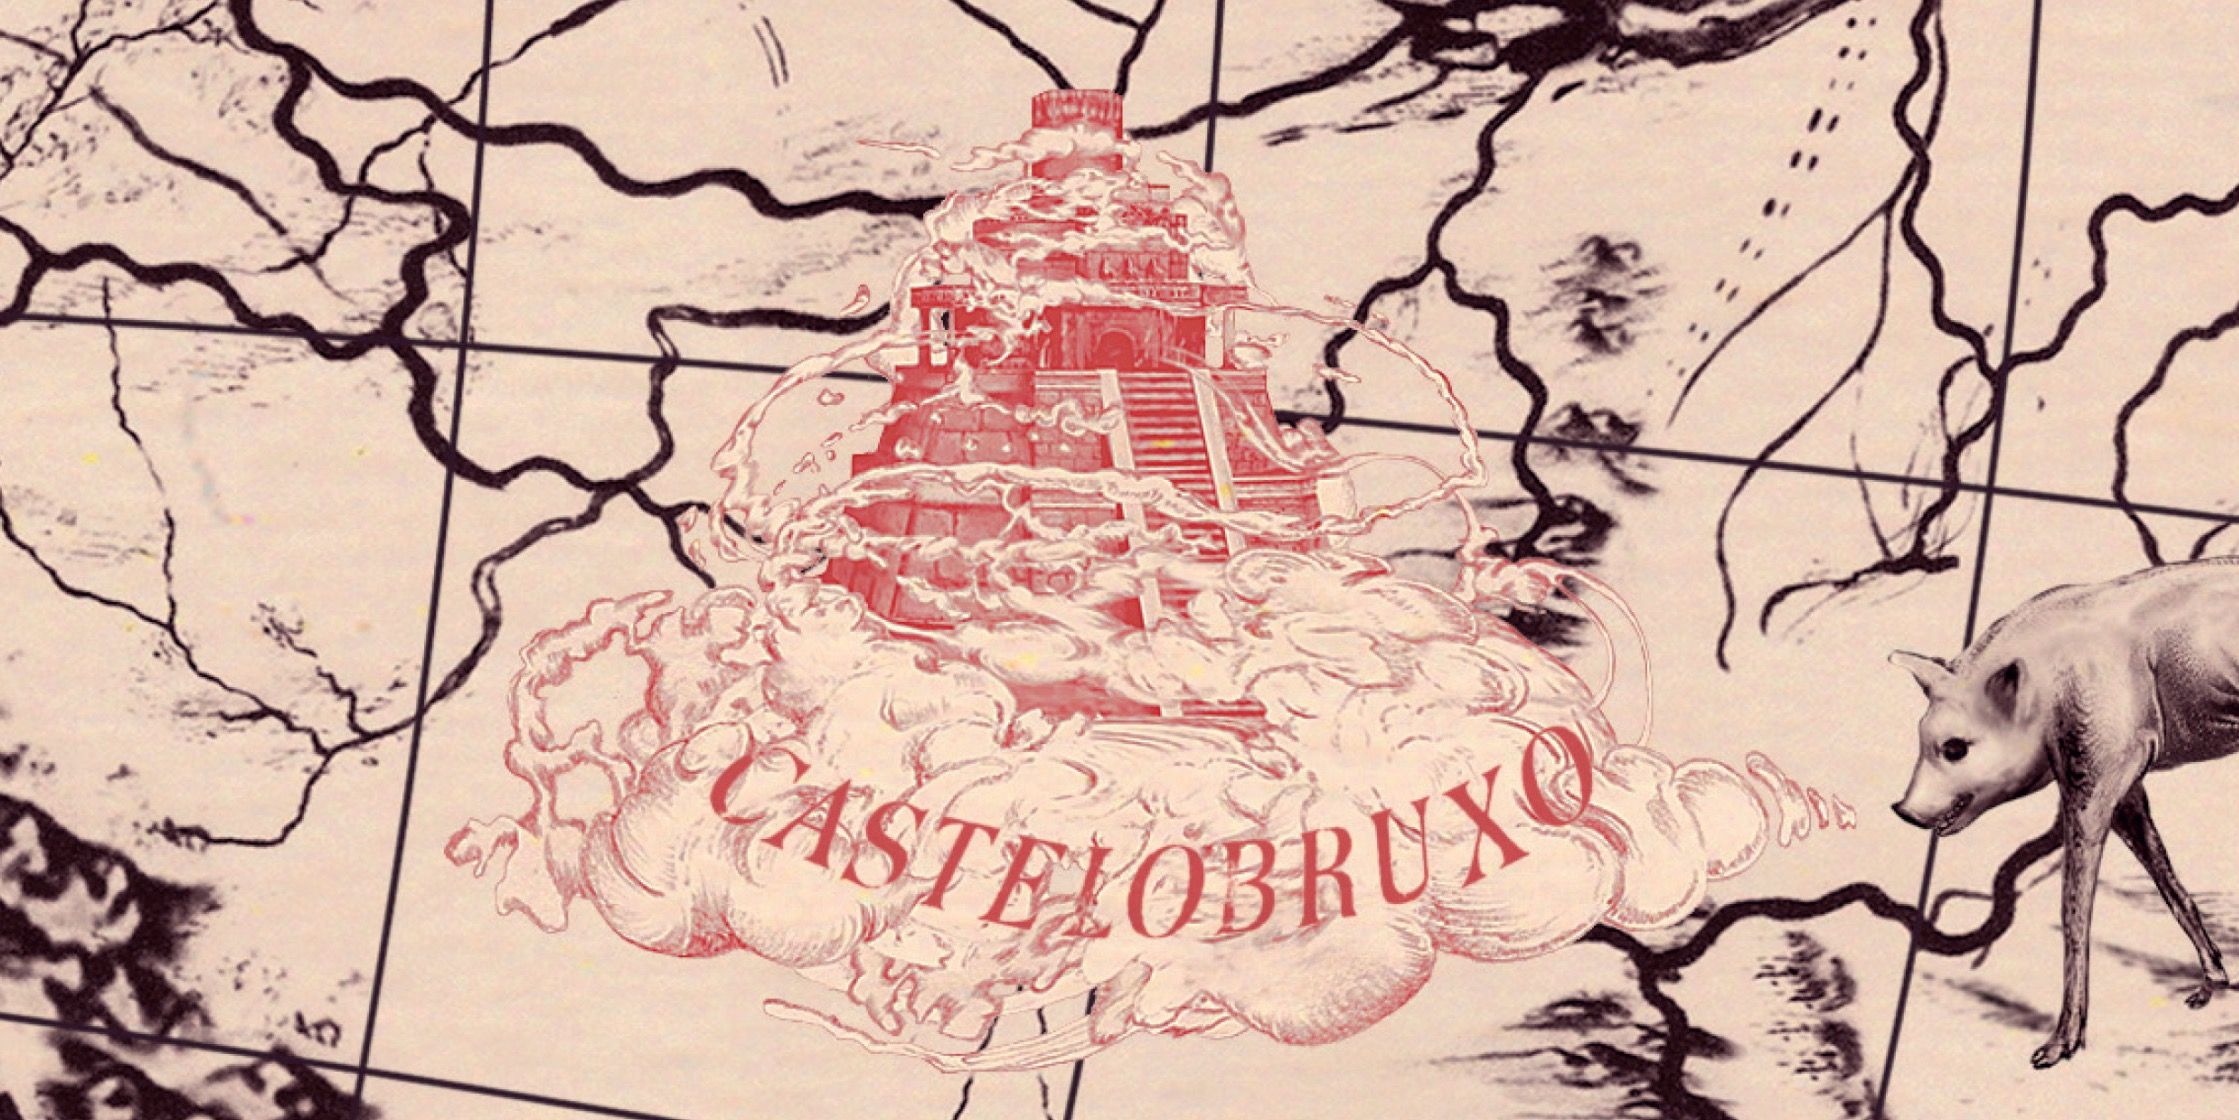 Castelobruxo as seein in a Harry Potter map